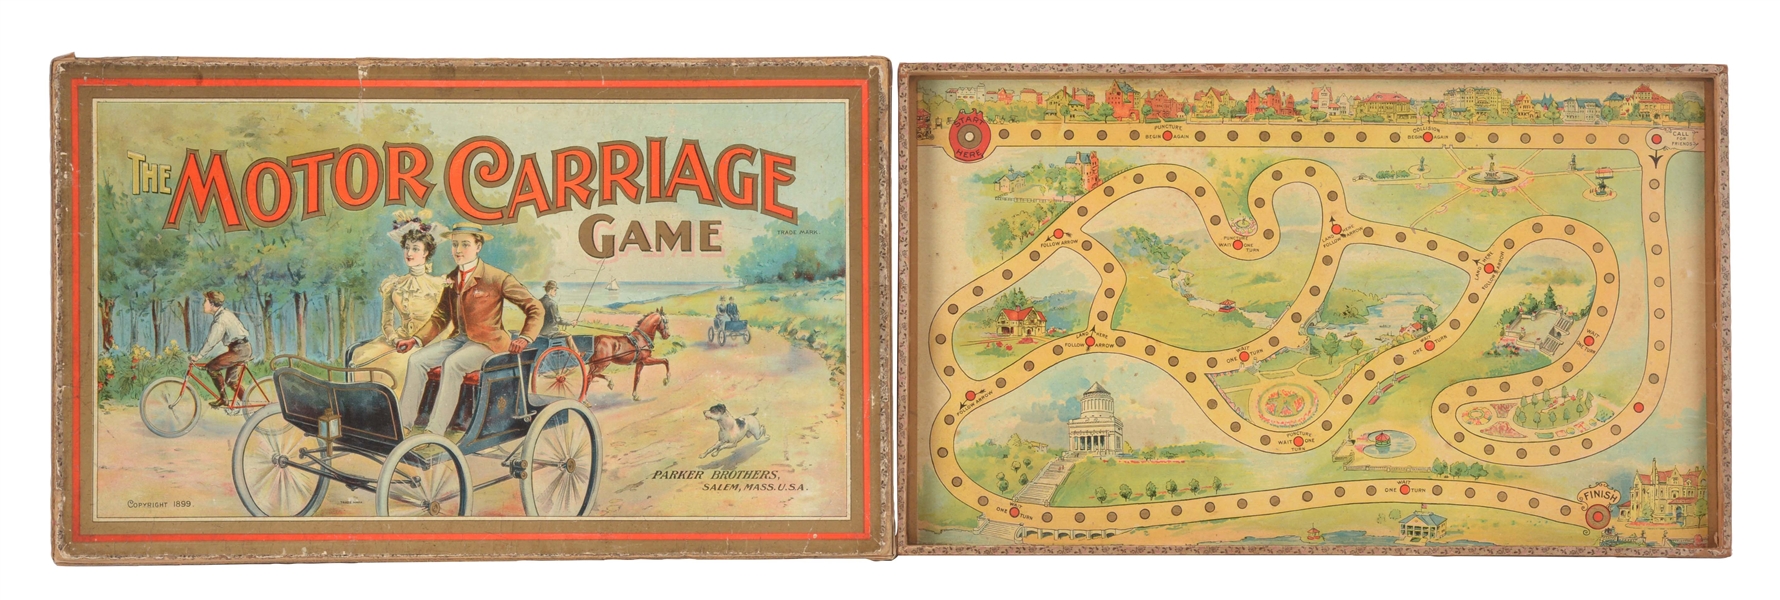 EARLY PARKER BROTHERS MOTOR CARRIAGE GAME. 